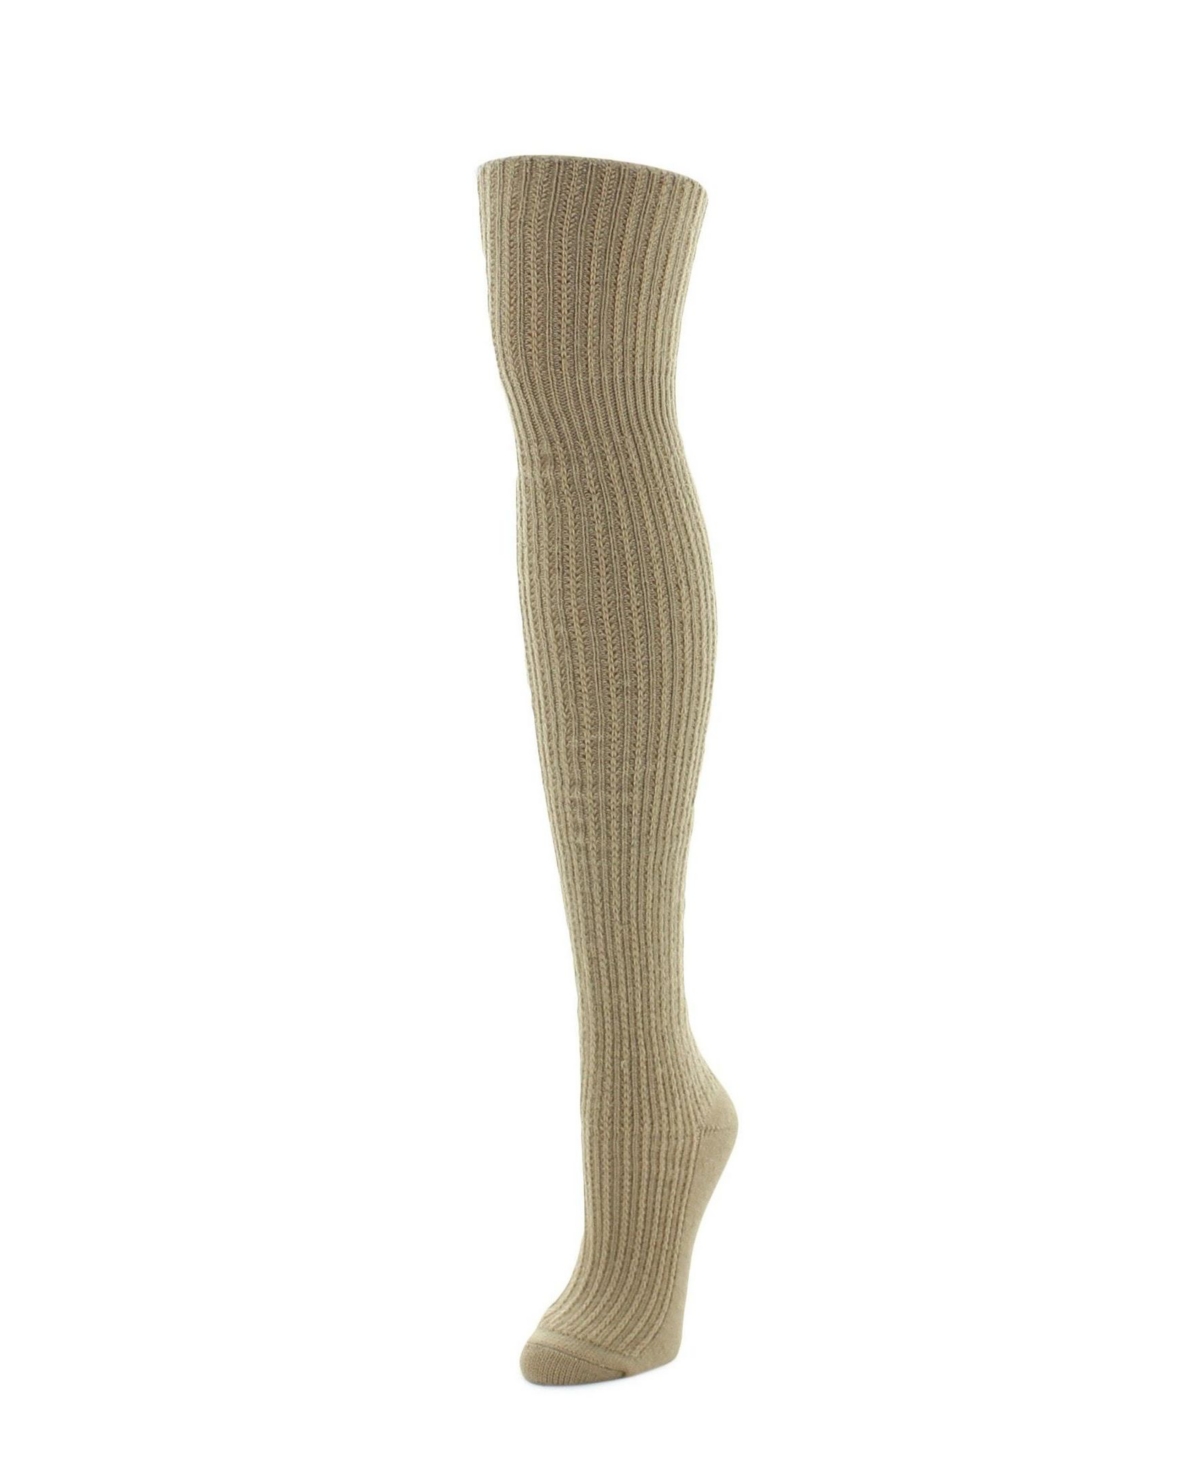 Women's Cable Rib Over The Knee Socks - Camel